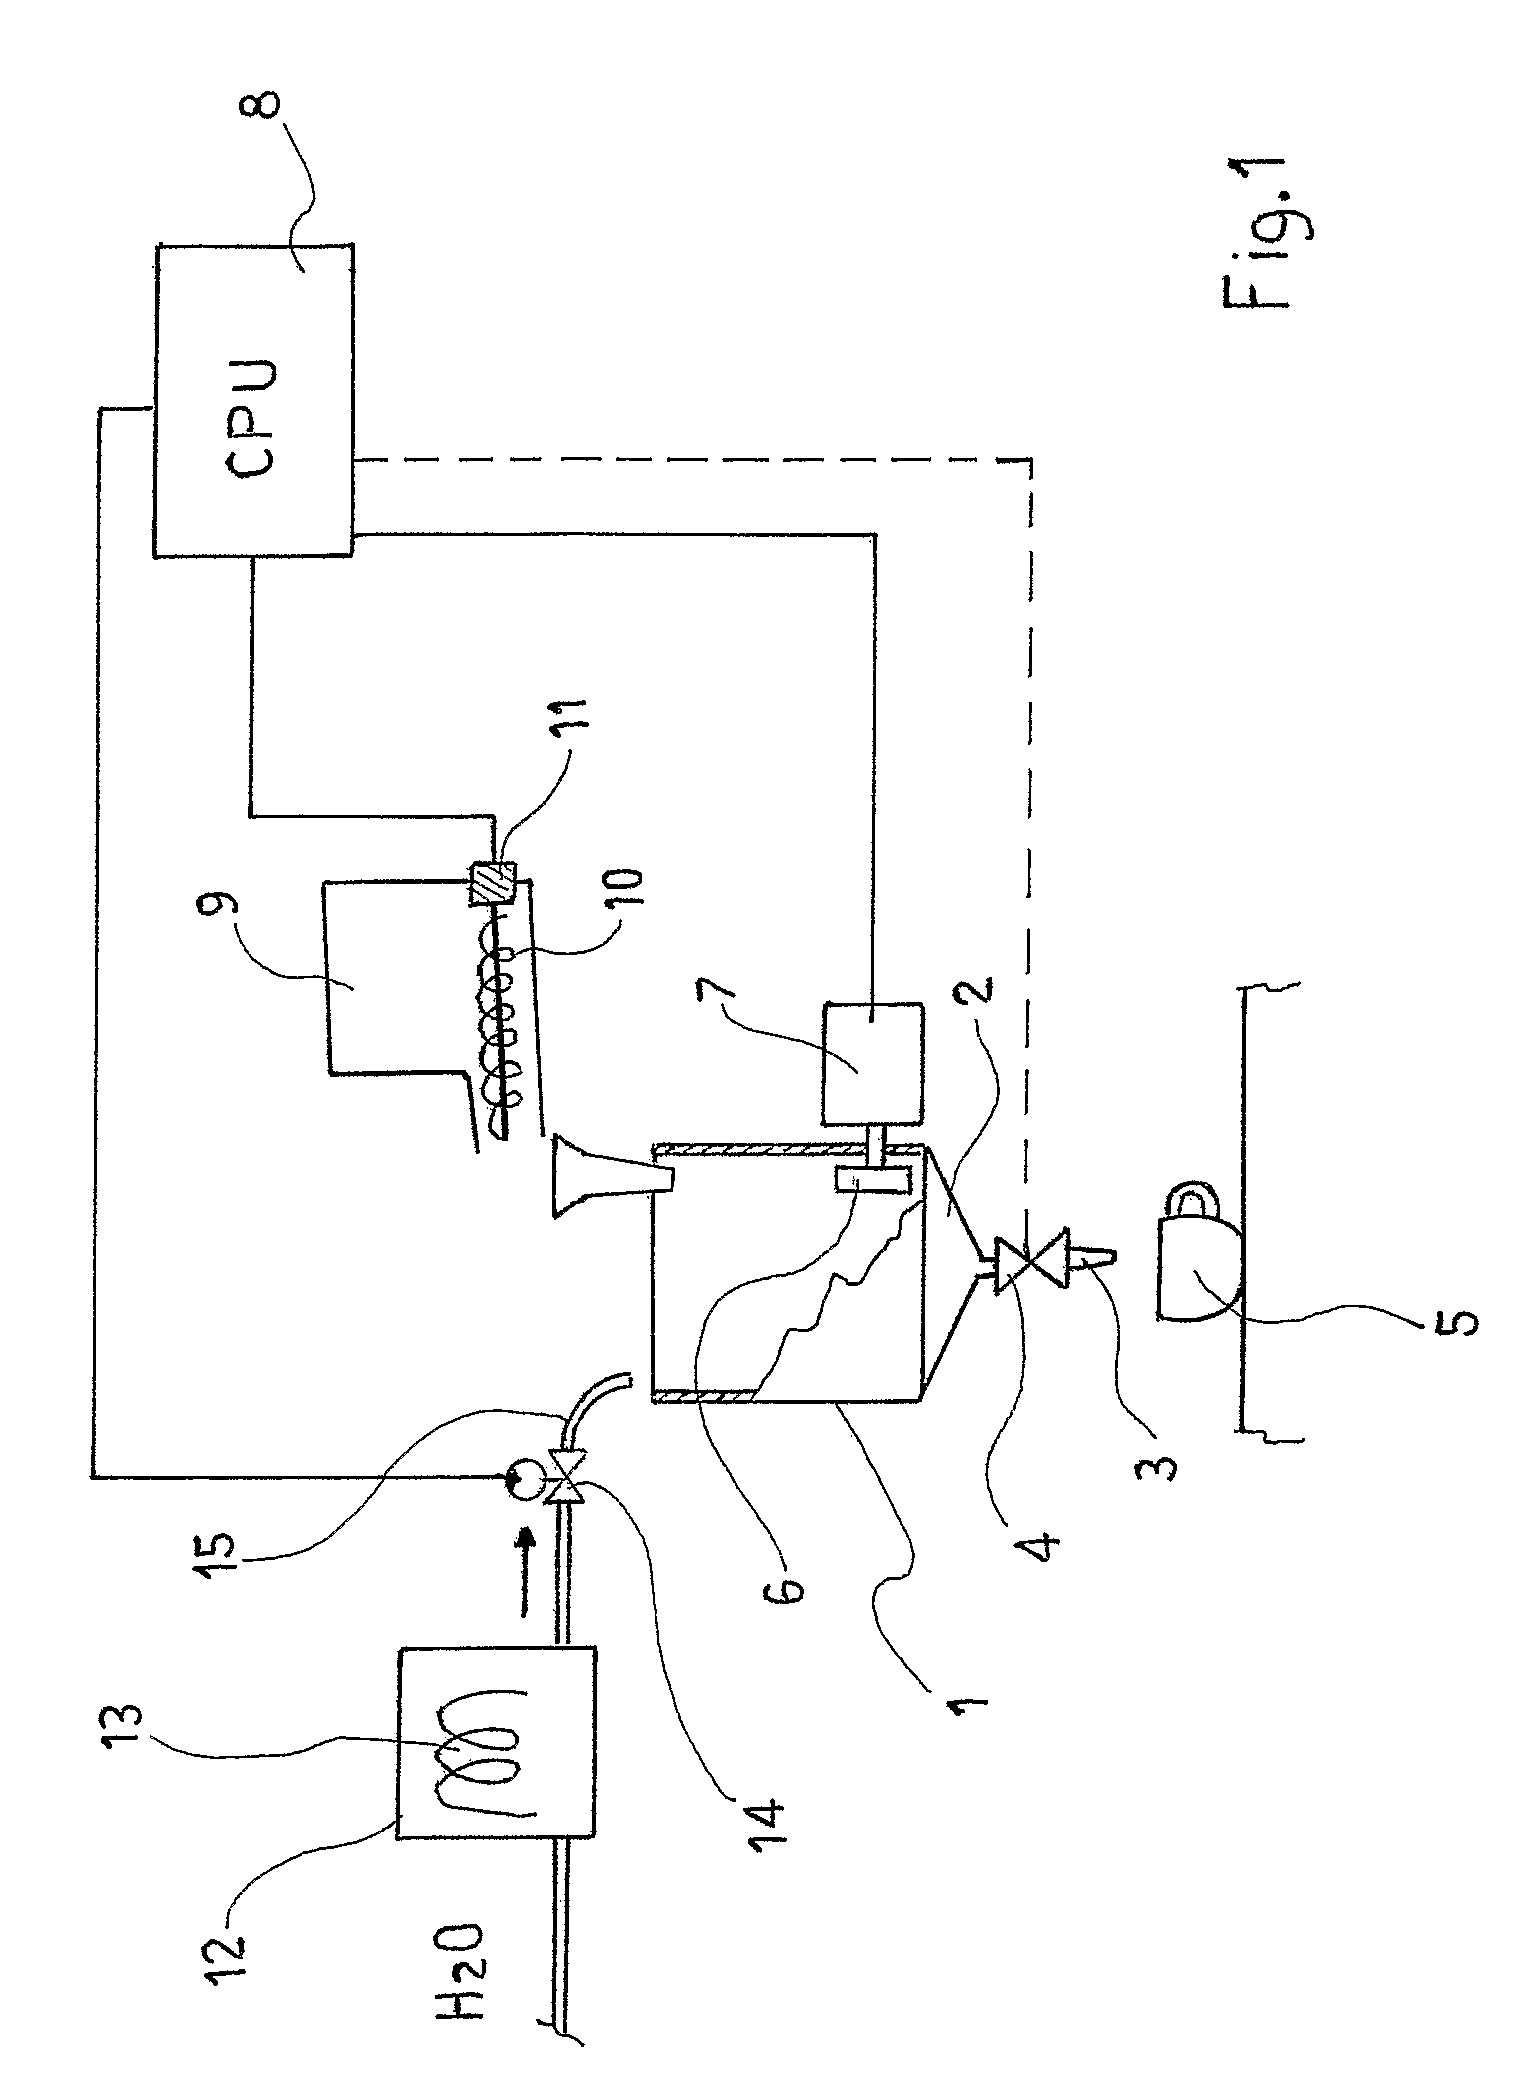 Method and apparatus for preparing beverages from soluble products